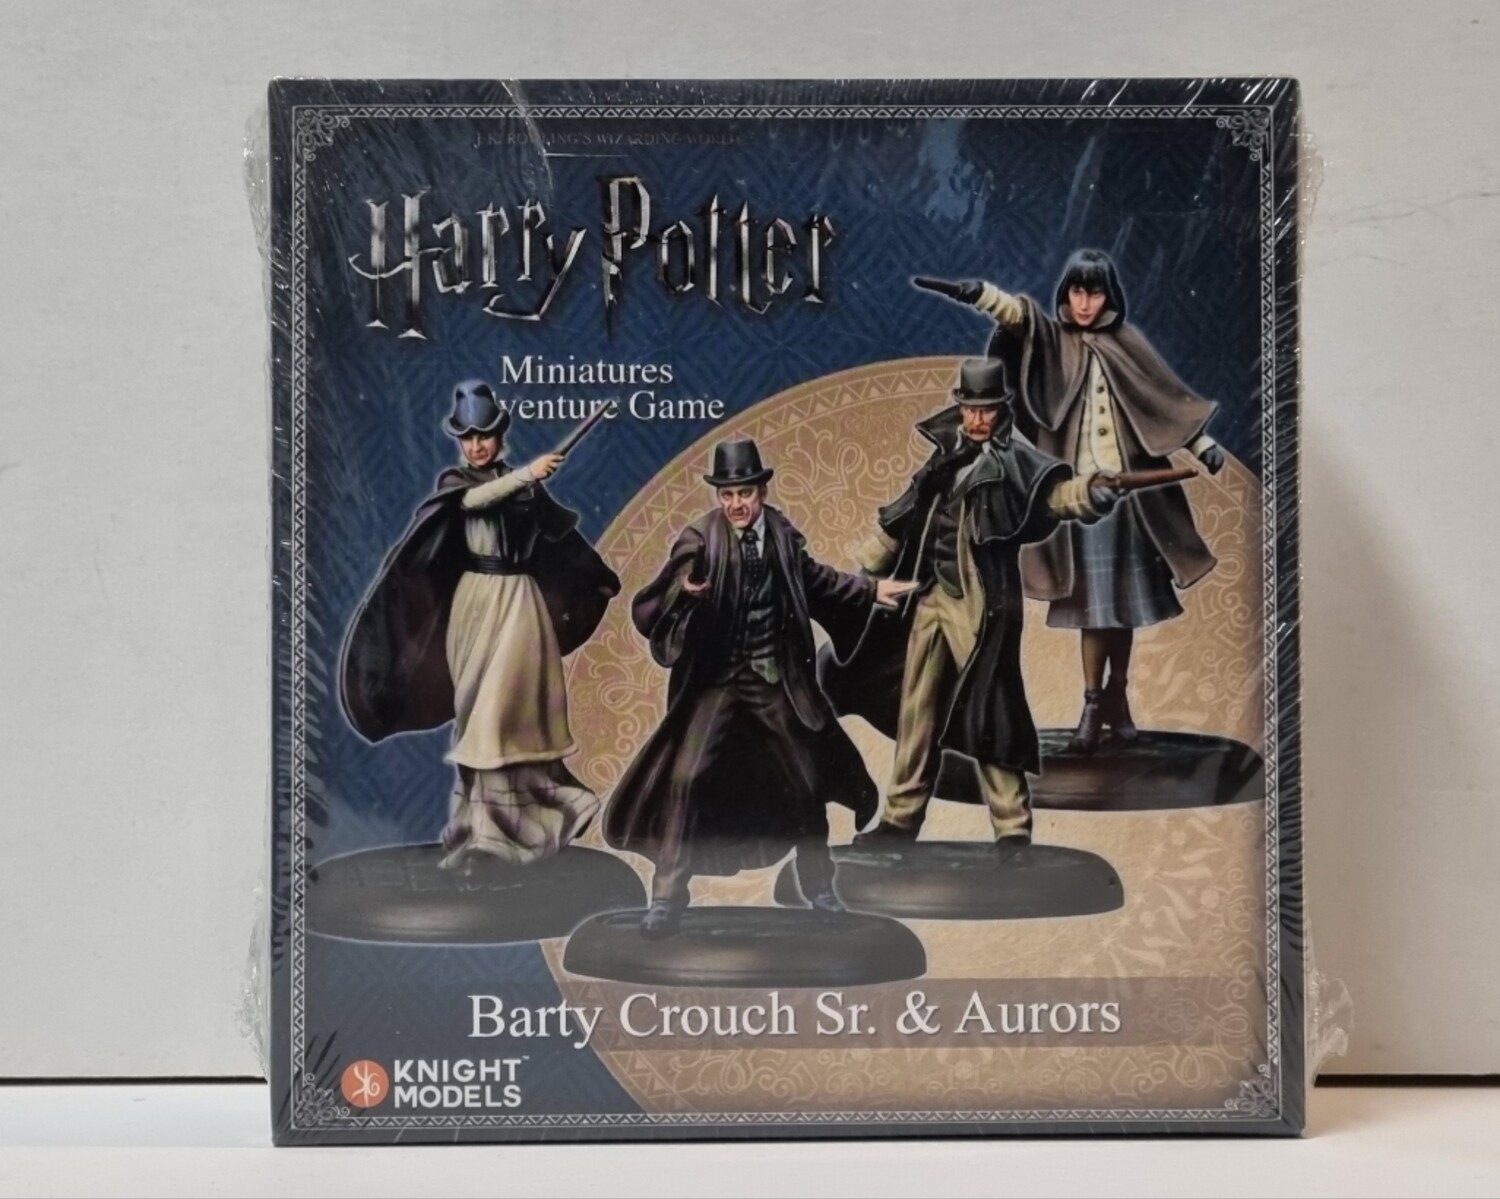 Harry Potter, Miniatures Adventure Game, HPMAG19, Barty Crouch Sr. & Aurors